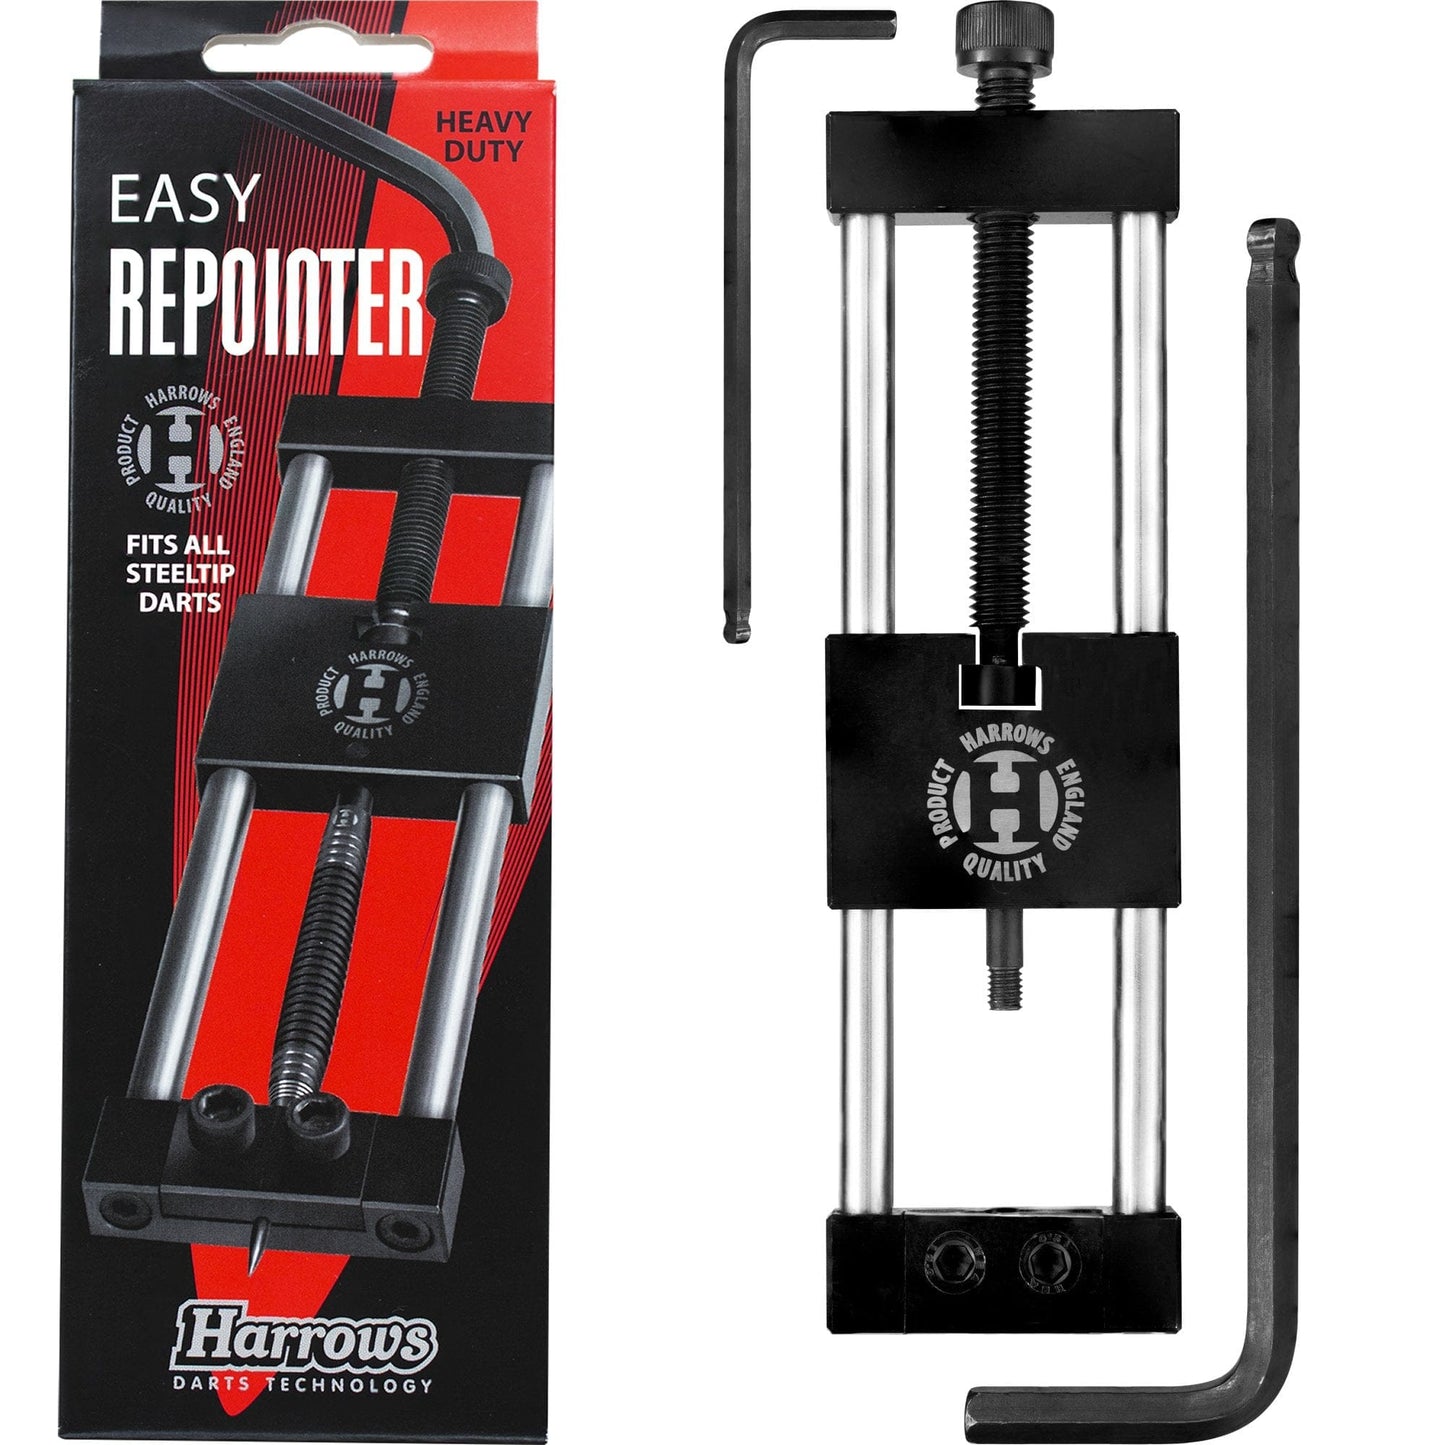 Harrows - Easy Repointer - Repointing Tool - for any Steel Tip Points